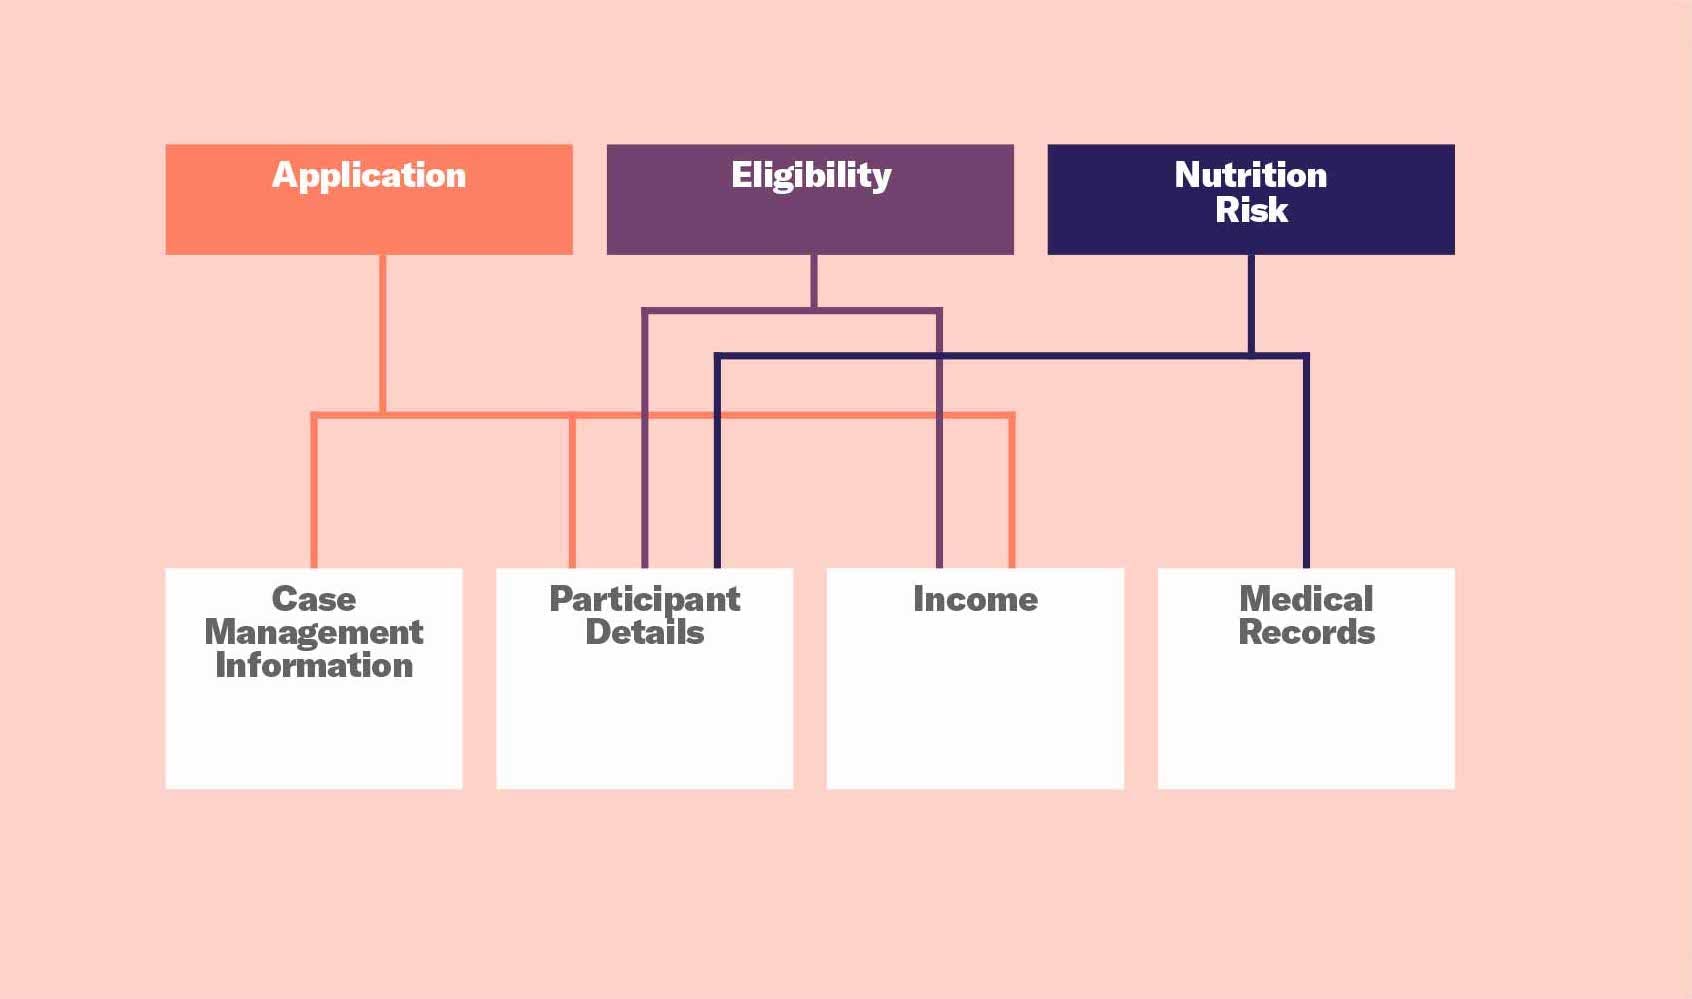 An example diagram breaks hypothetical parts of the WIC certification process — Application, Eligibility, and Nutrition Risk — into modules like Case Management Information and Participant Details.